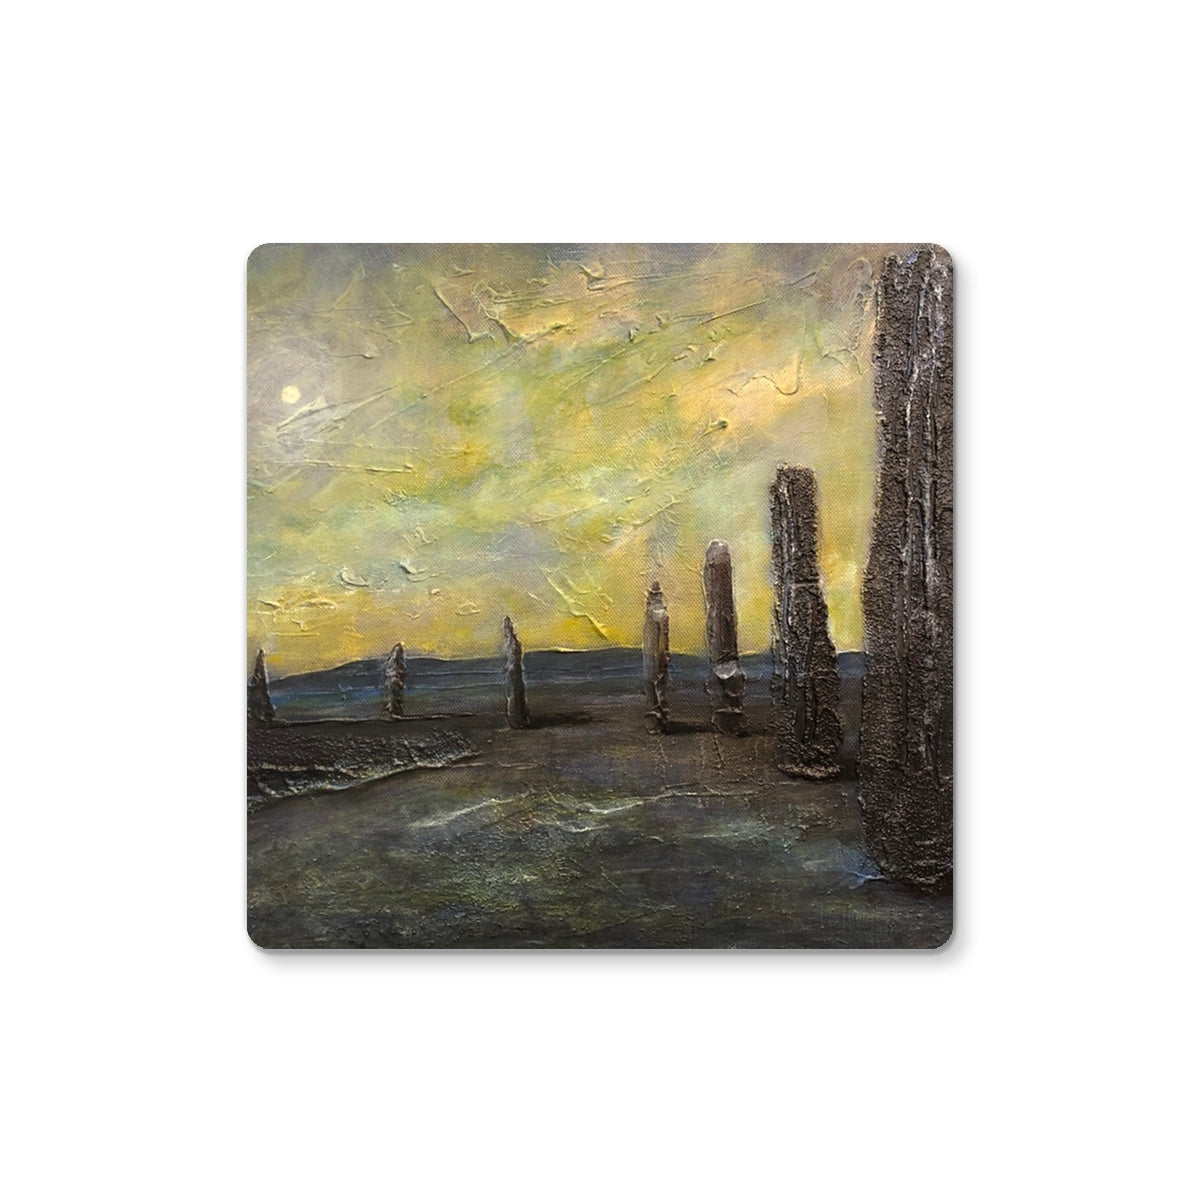 An Ethereal Ring Of Brodgar Art Gifts Coaster-Coasters-Orkney Art Gallery-Single Coaster-Paintings, Prints, Homeware, Art Gifts From Scotland By Scottish Artist Kevin Hunter